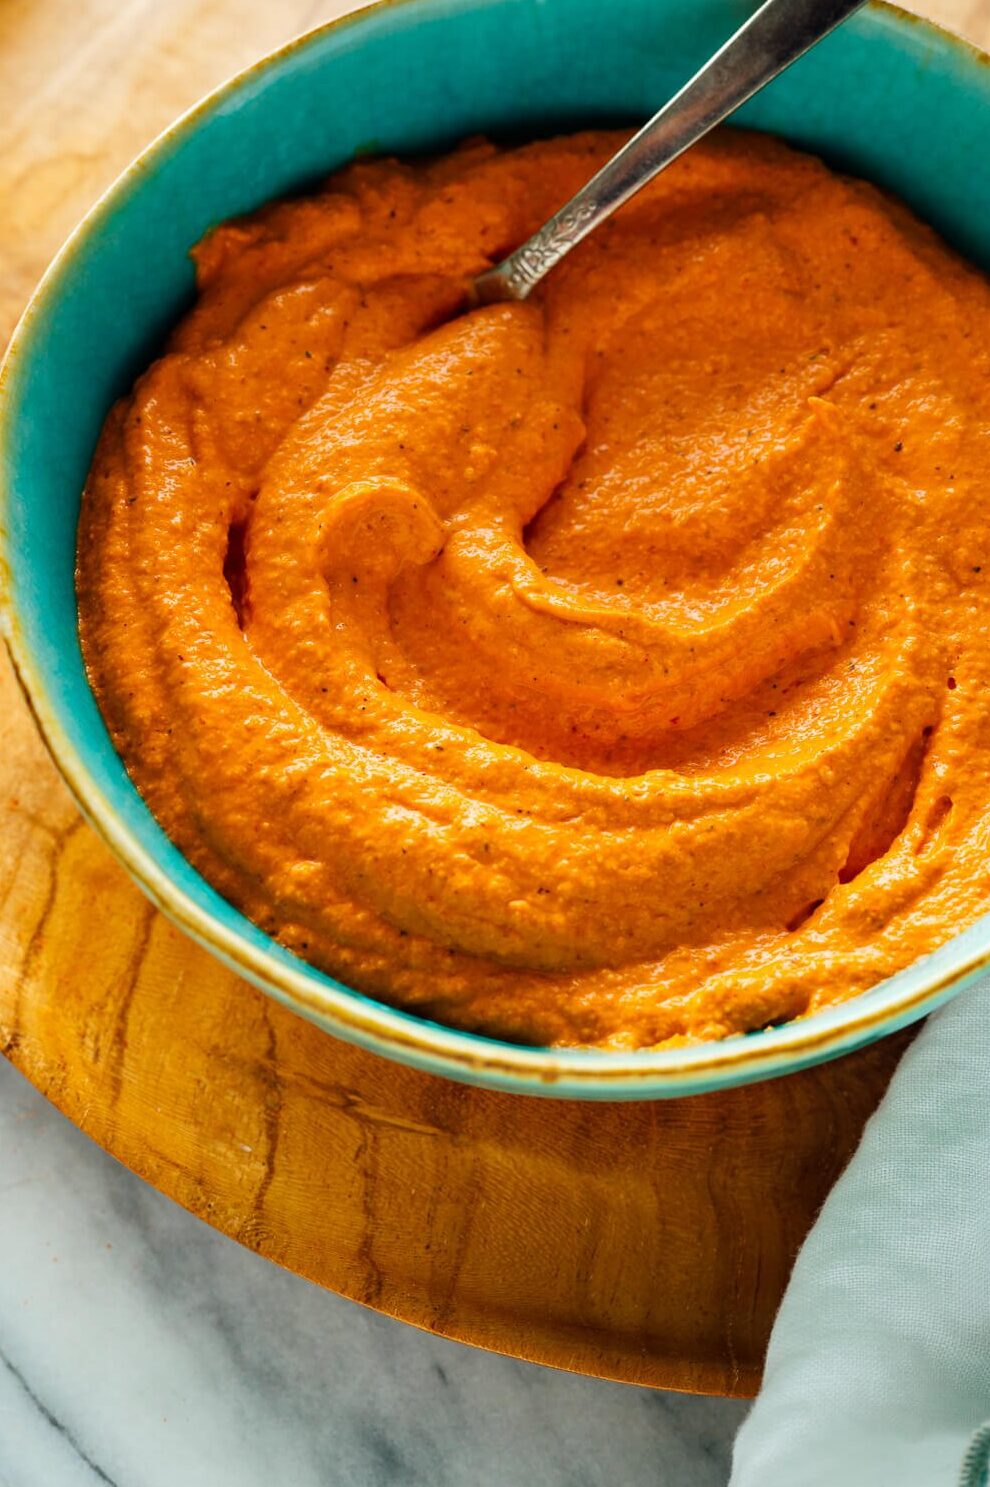 https://www.theculinarypro.com/coulis-romesco